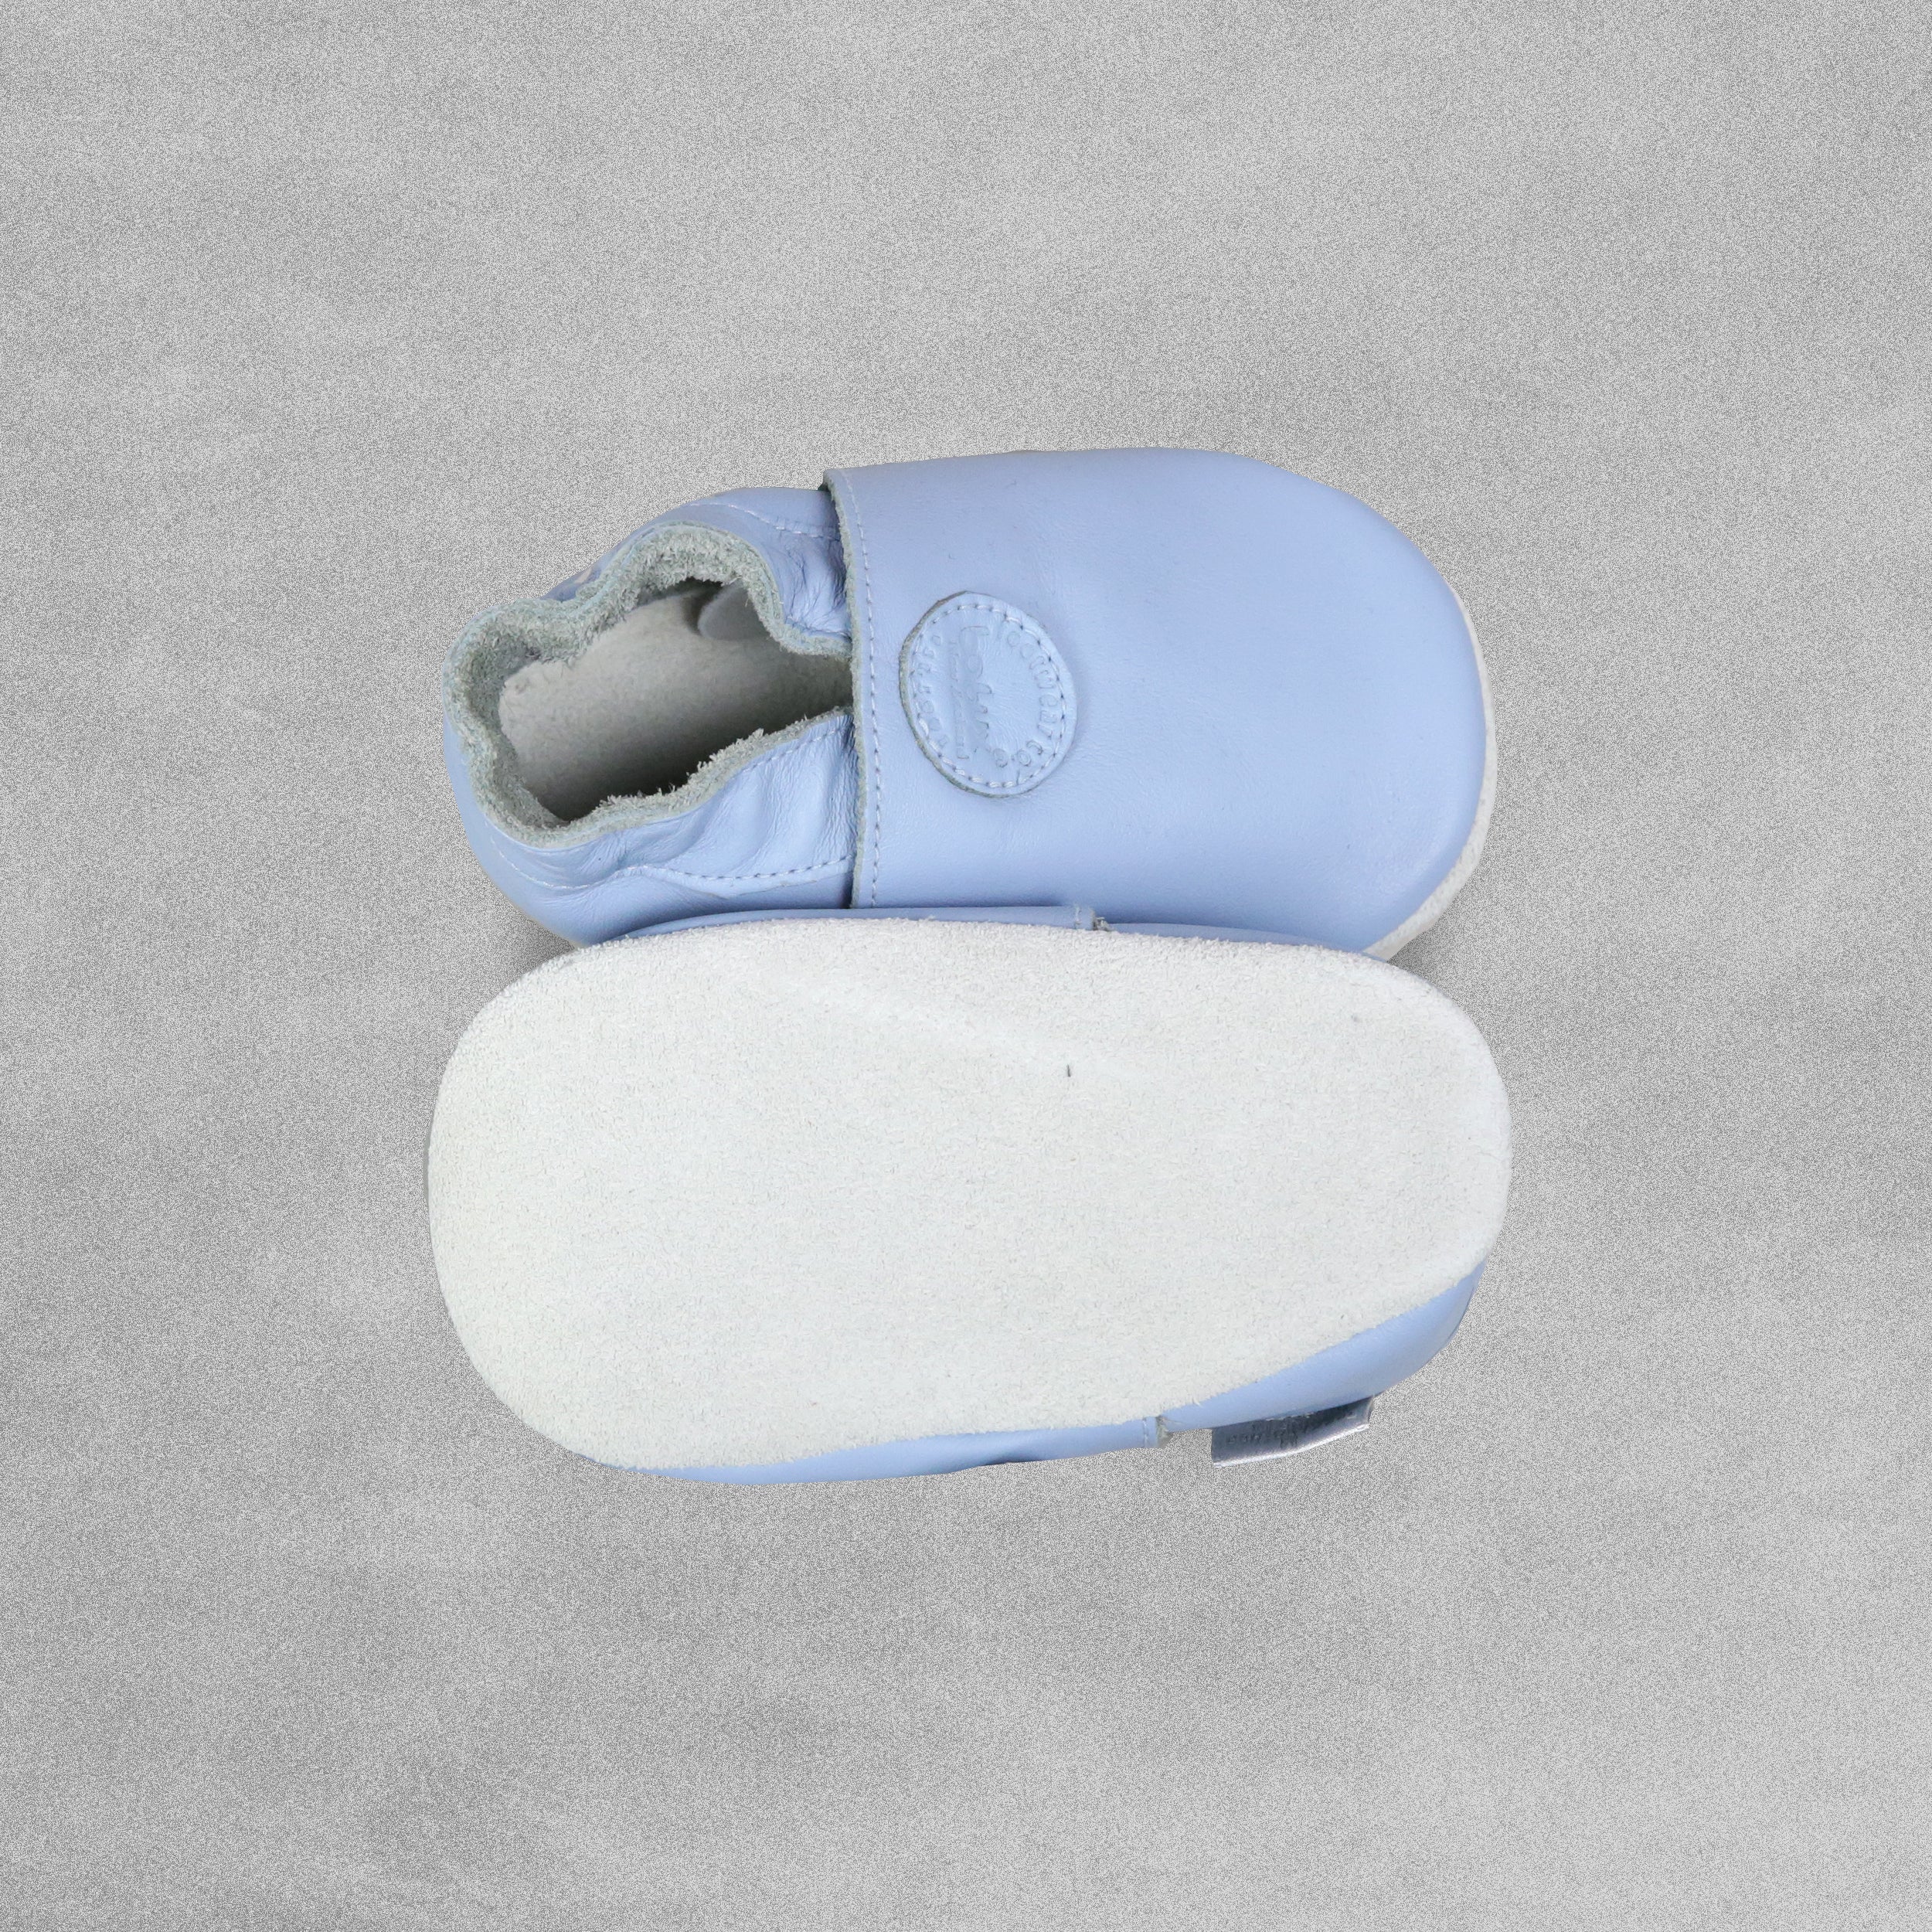 Bobux Soft Sole Baby Shoe 'Baby Blue' - Small /3-9 Months